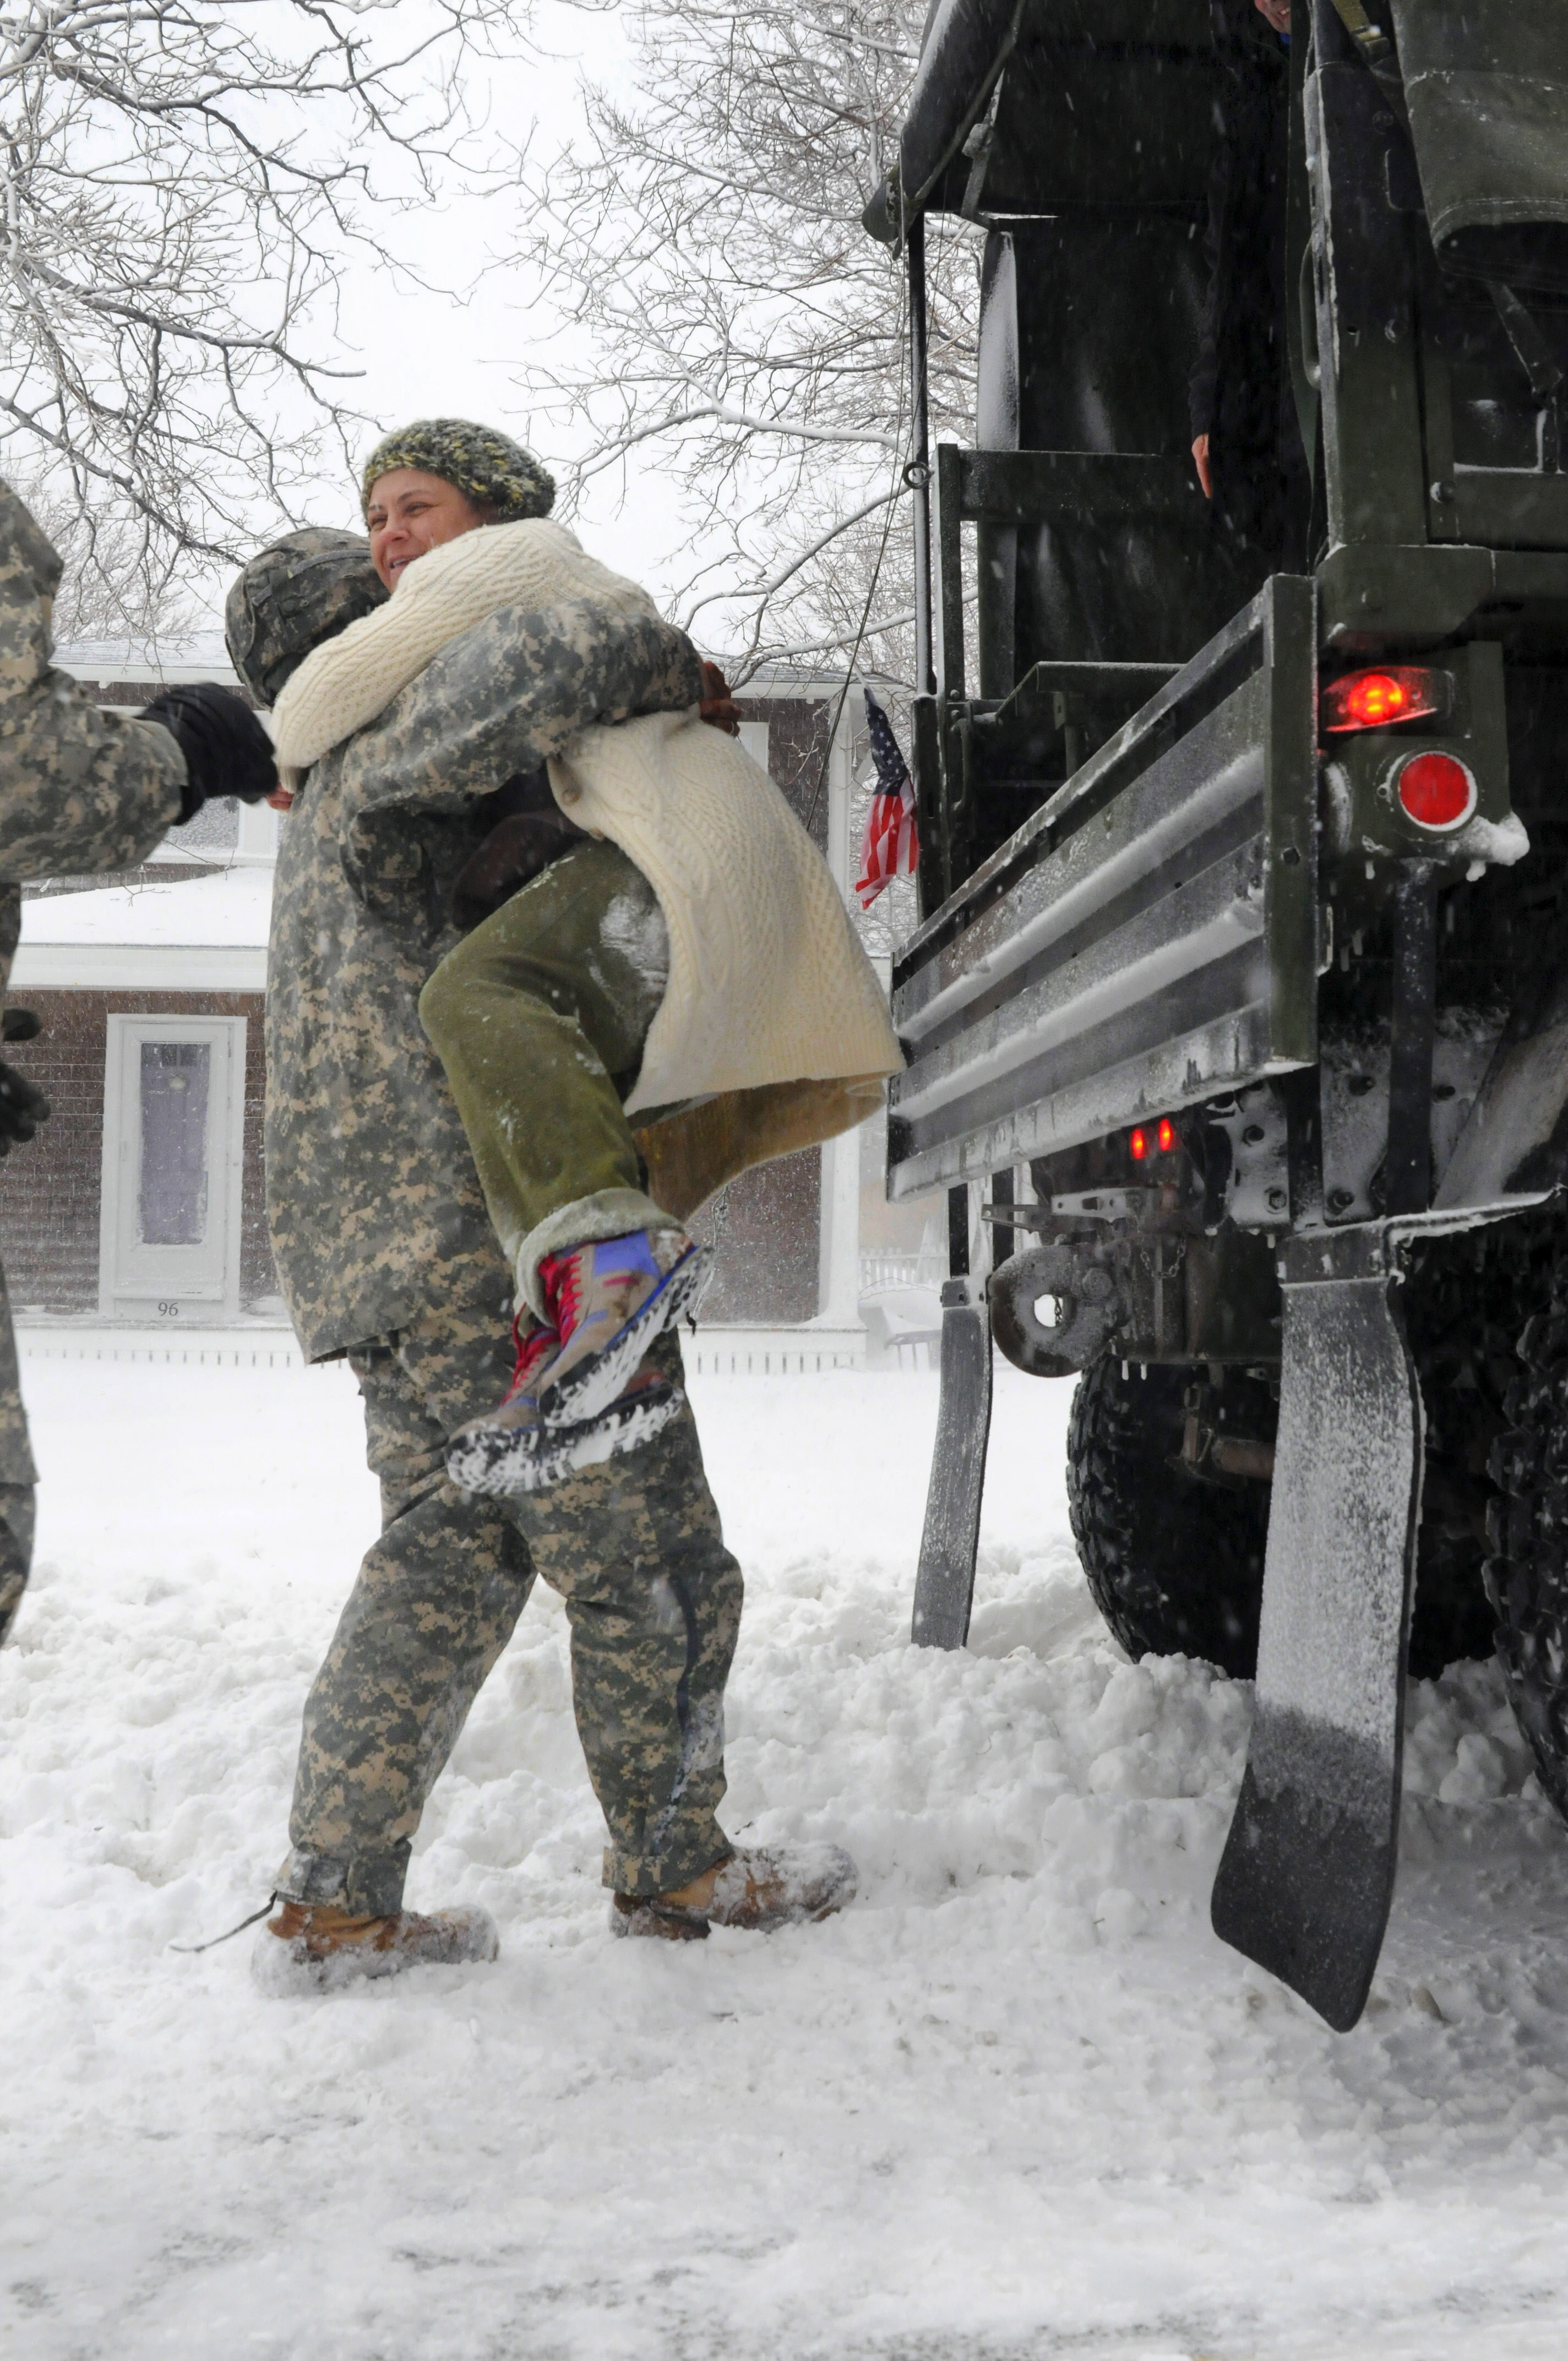 Post-blizzard, Airmen and Soldiers packing up in Northeast